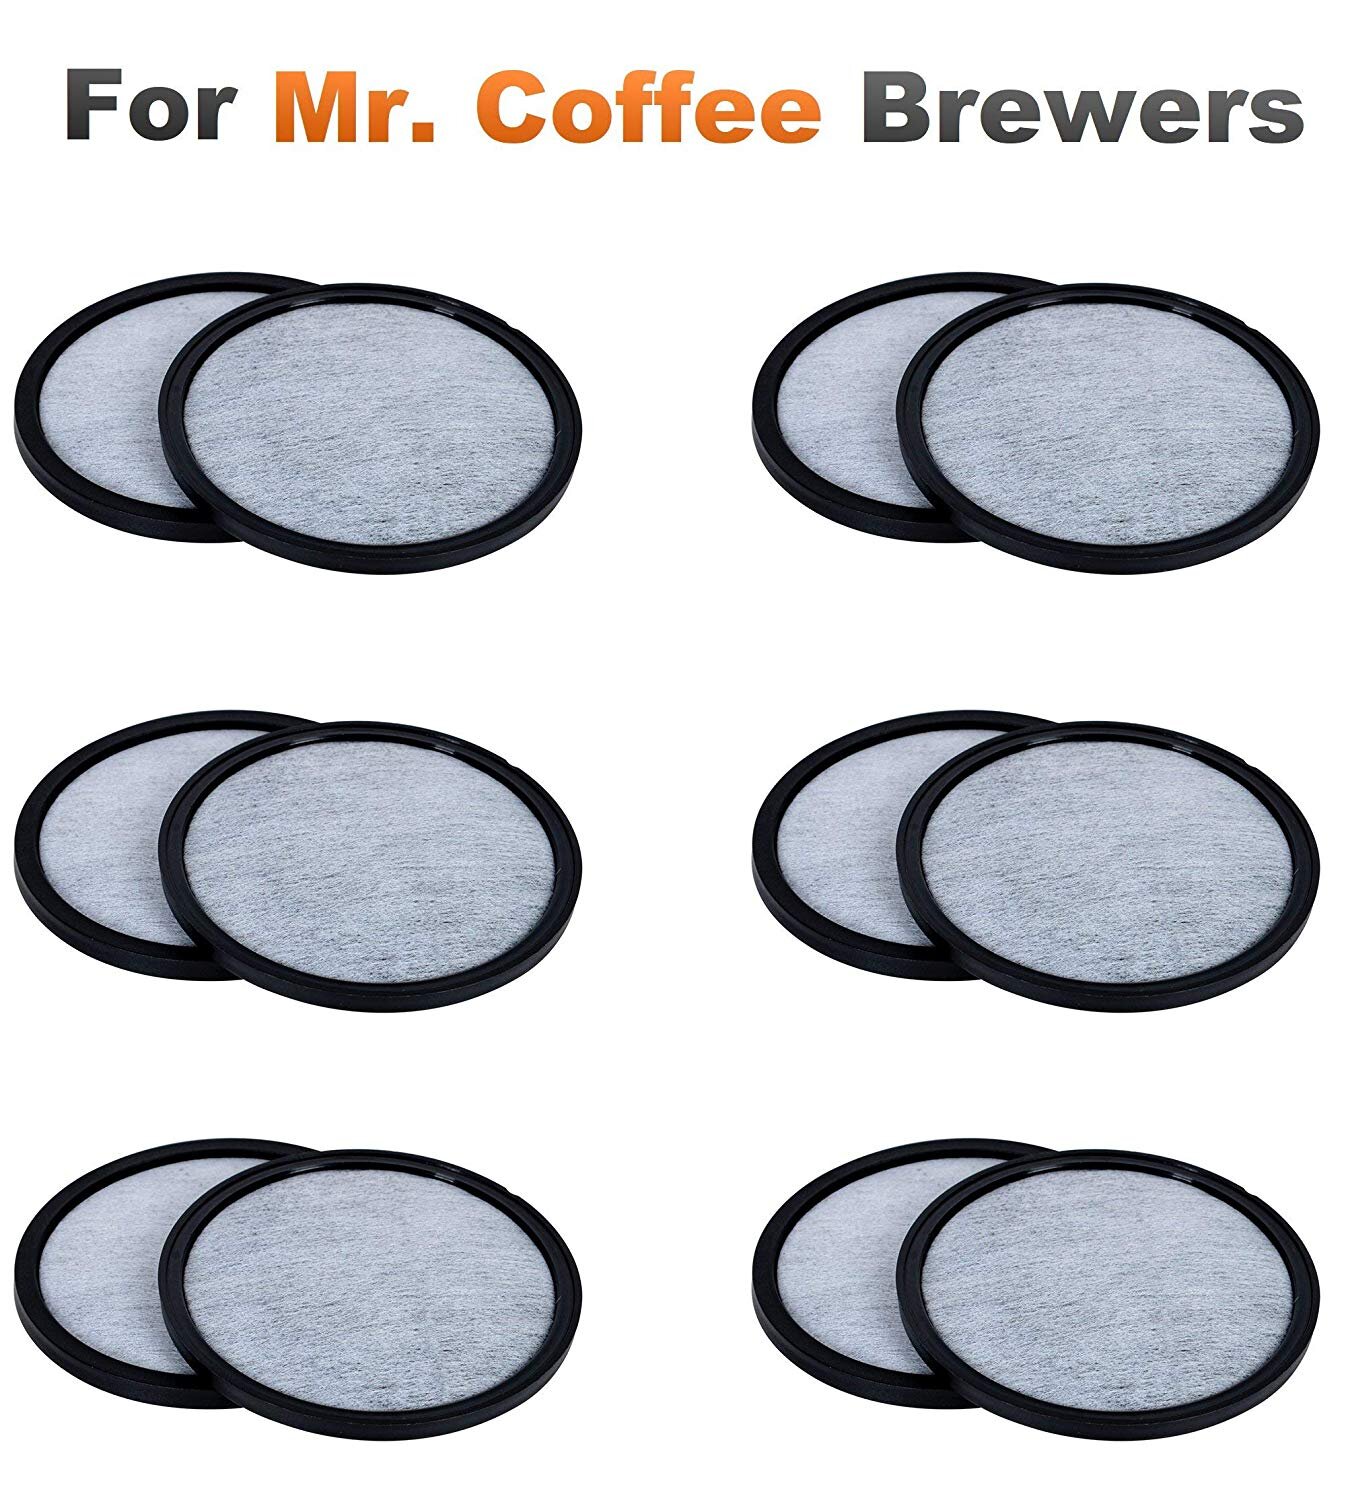 12-Pack Replacement Charcoal Water Filter Discs for Mr Coffee Brewers Coffee Machines 